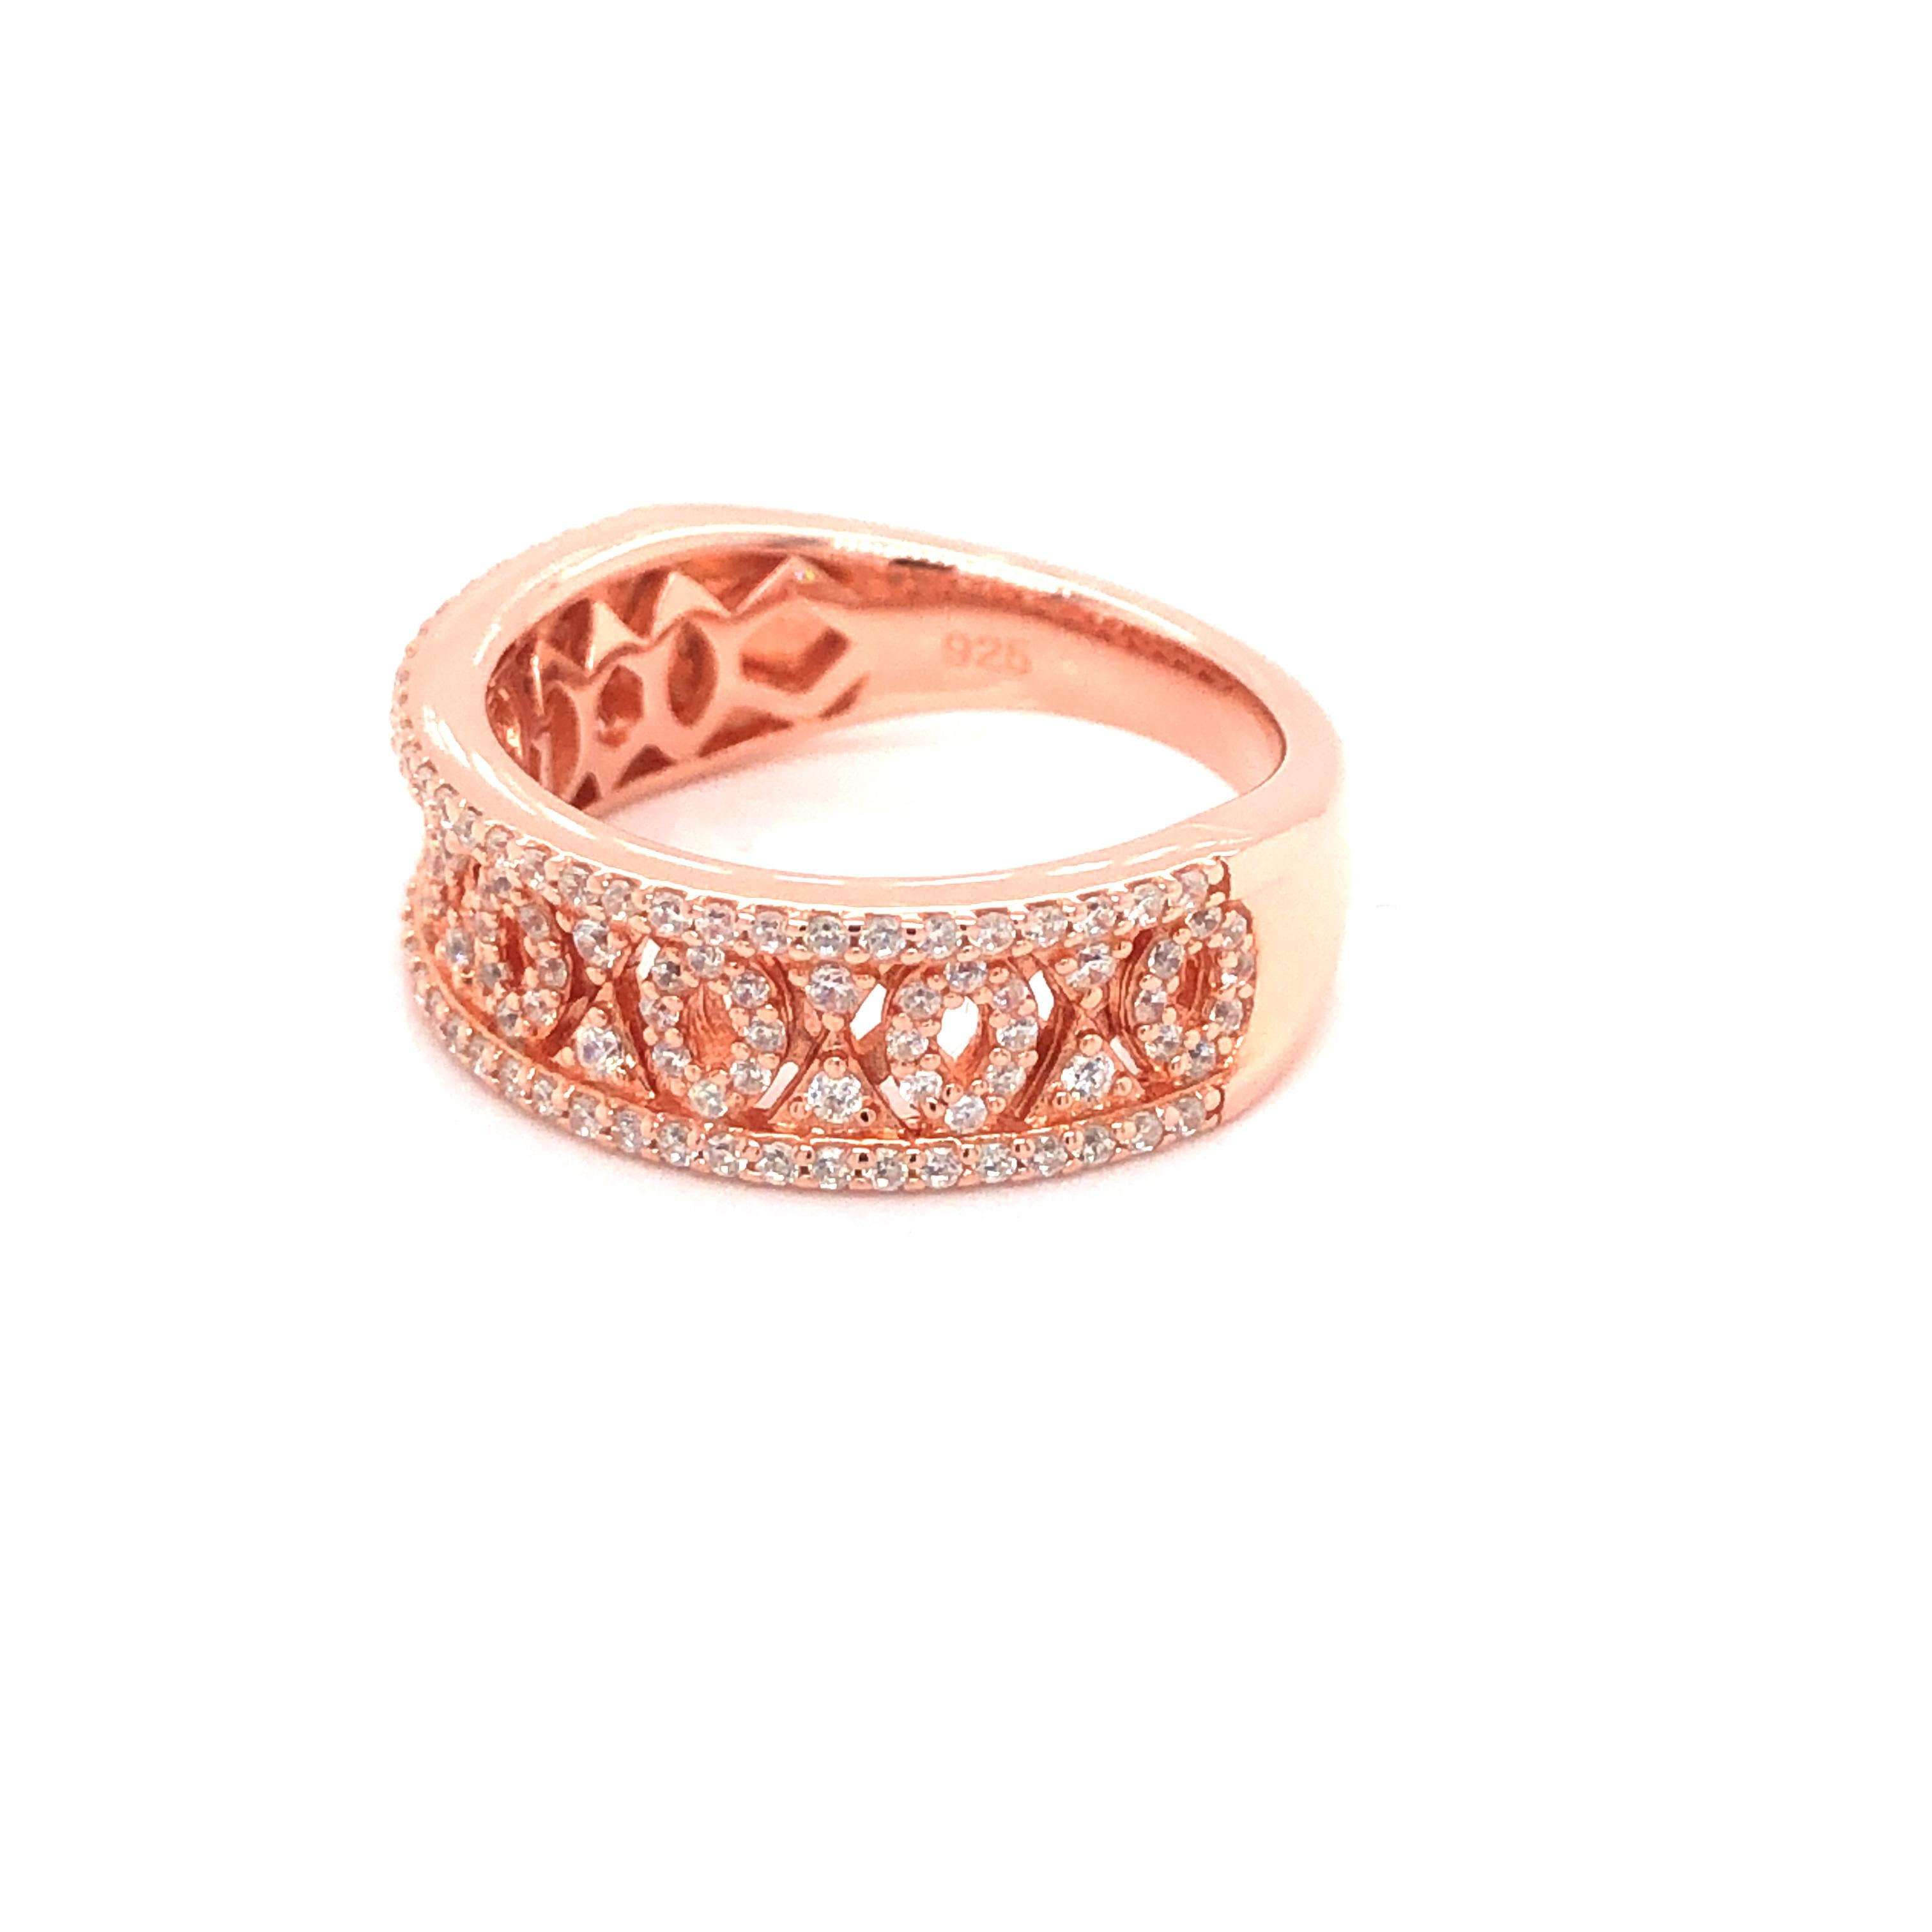 1.07 Carat Cubic Zirconia Rose Gold Plated Half Filigree Wedding Band Ring In New Condition For Sale In London, GB